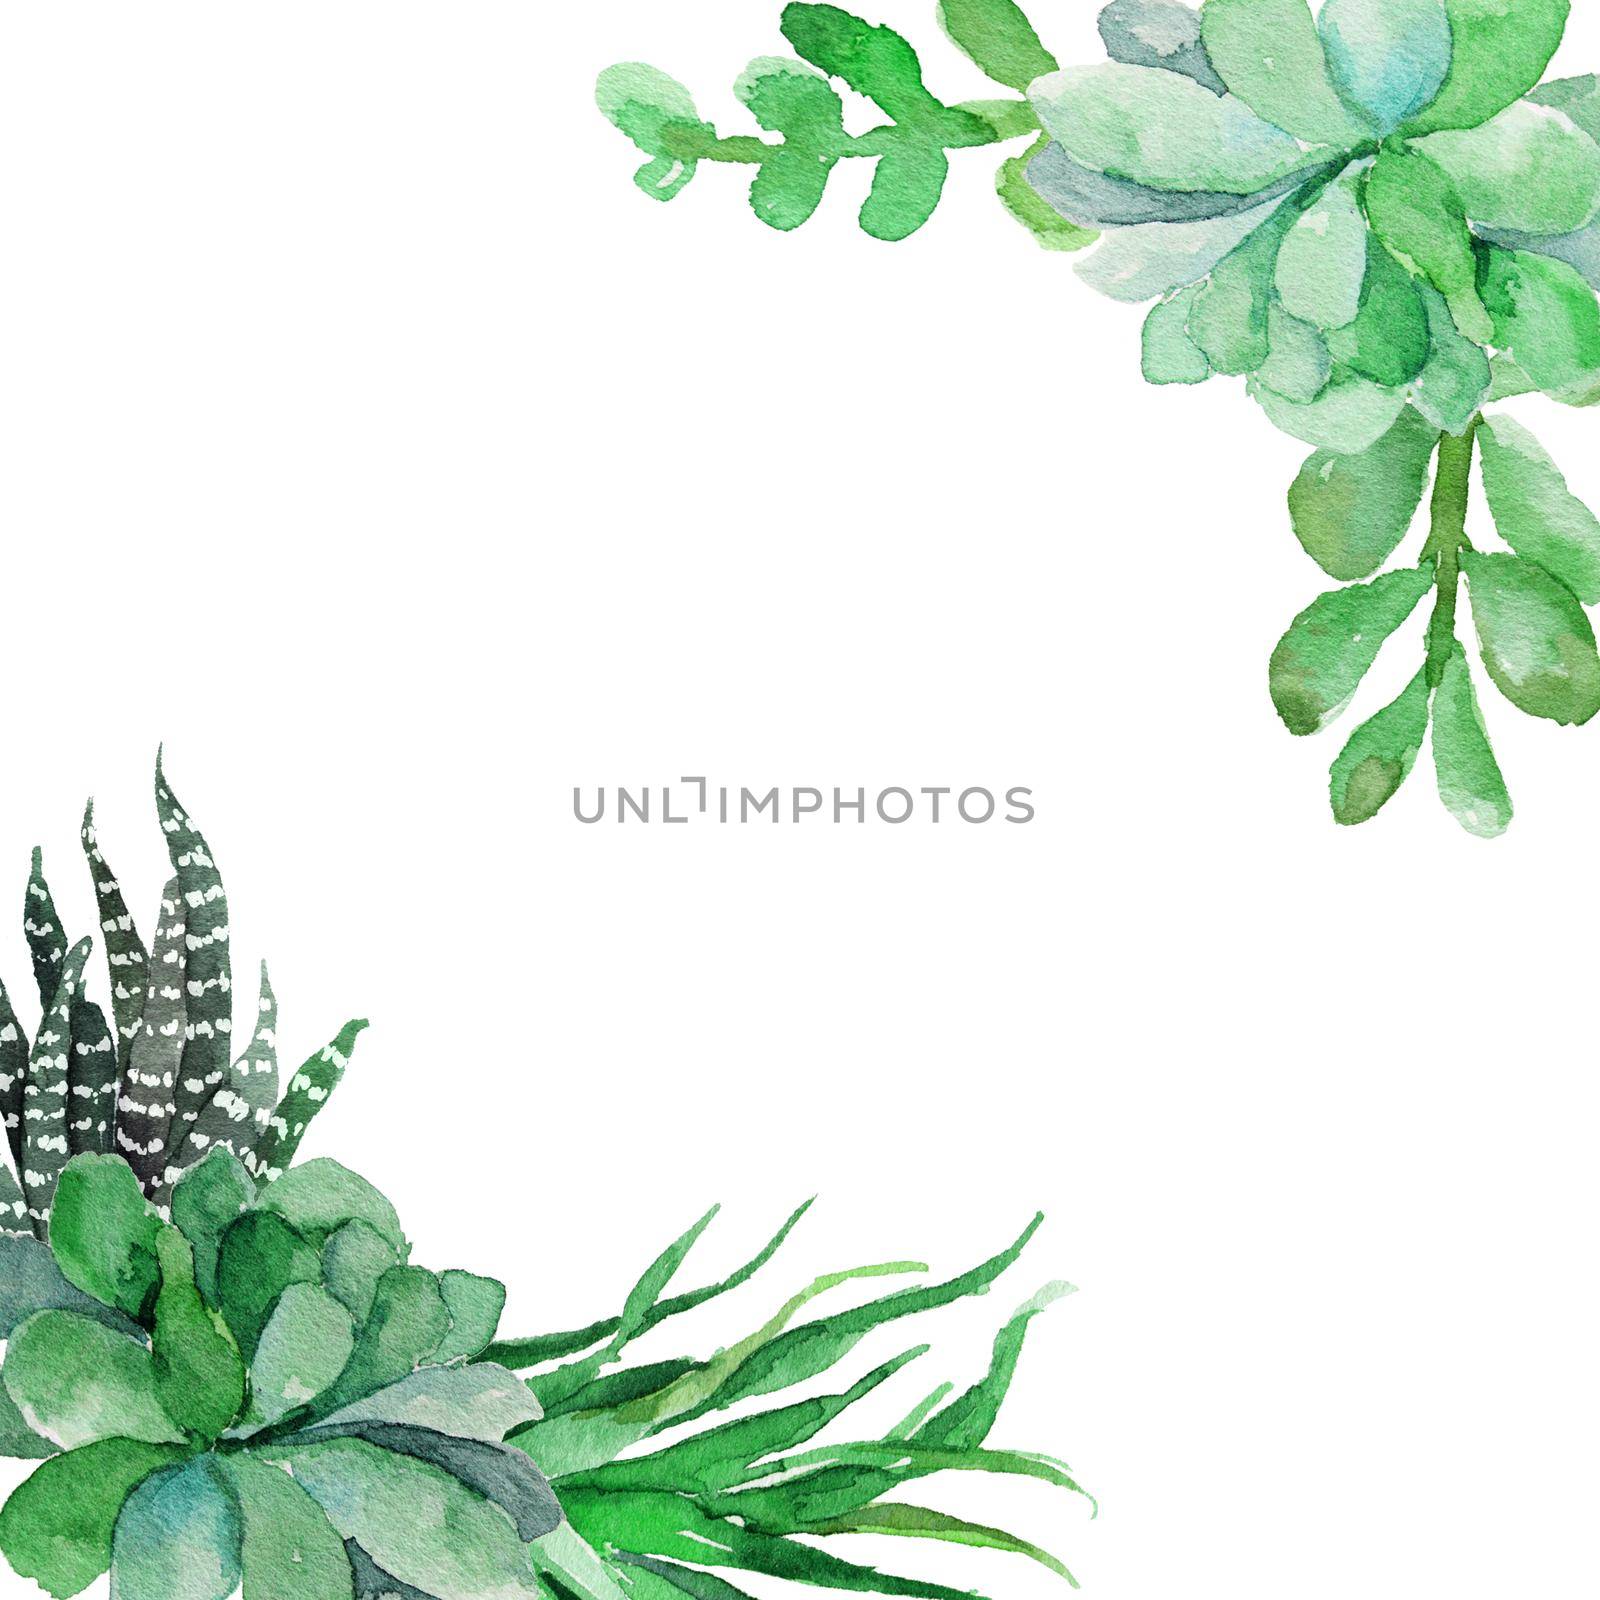 watercolor flower frame backgrounds. Beautiful greeting card with green leaves on white background. illustration.